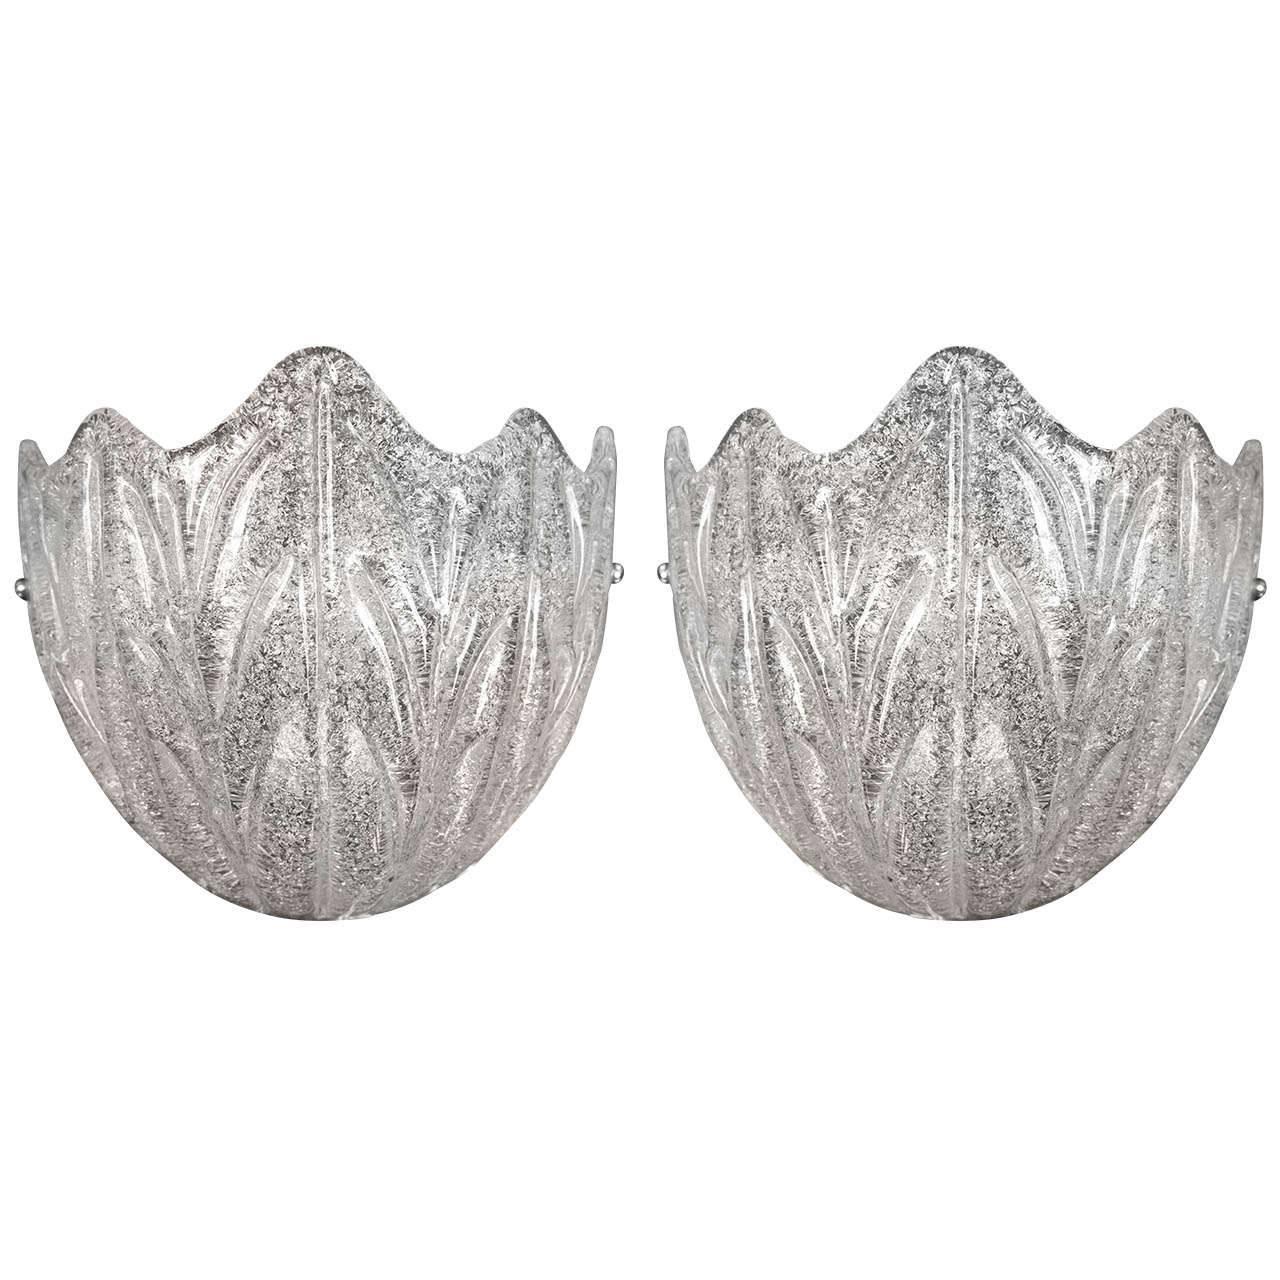 Pair of Modern Icy Sconces